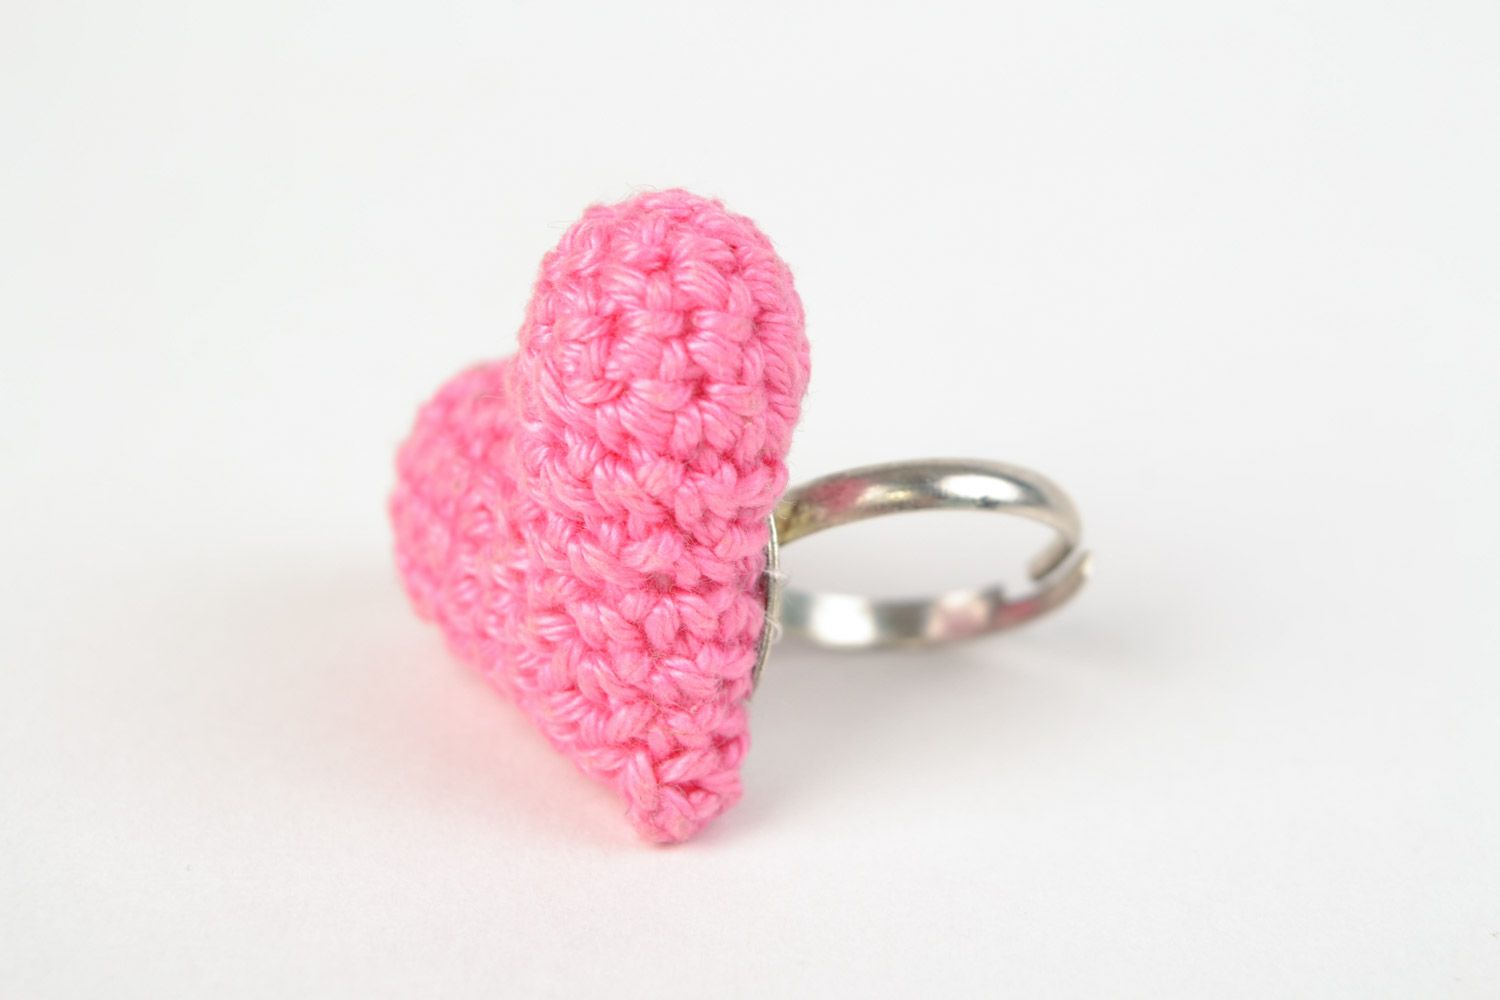 Handmade tender ring of adjustable size with crochet pink heart for girls photo 5